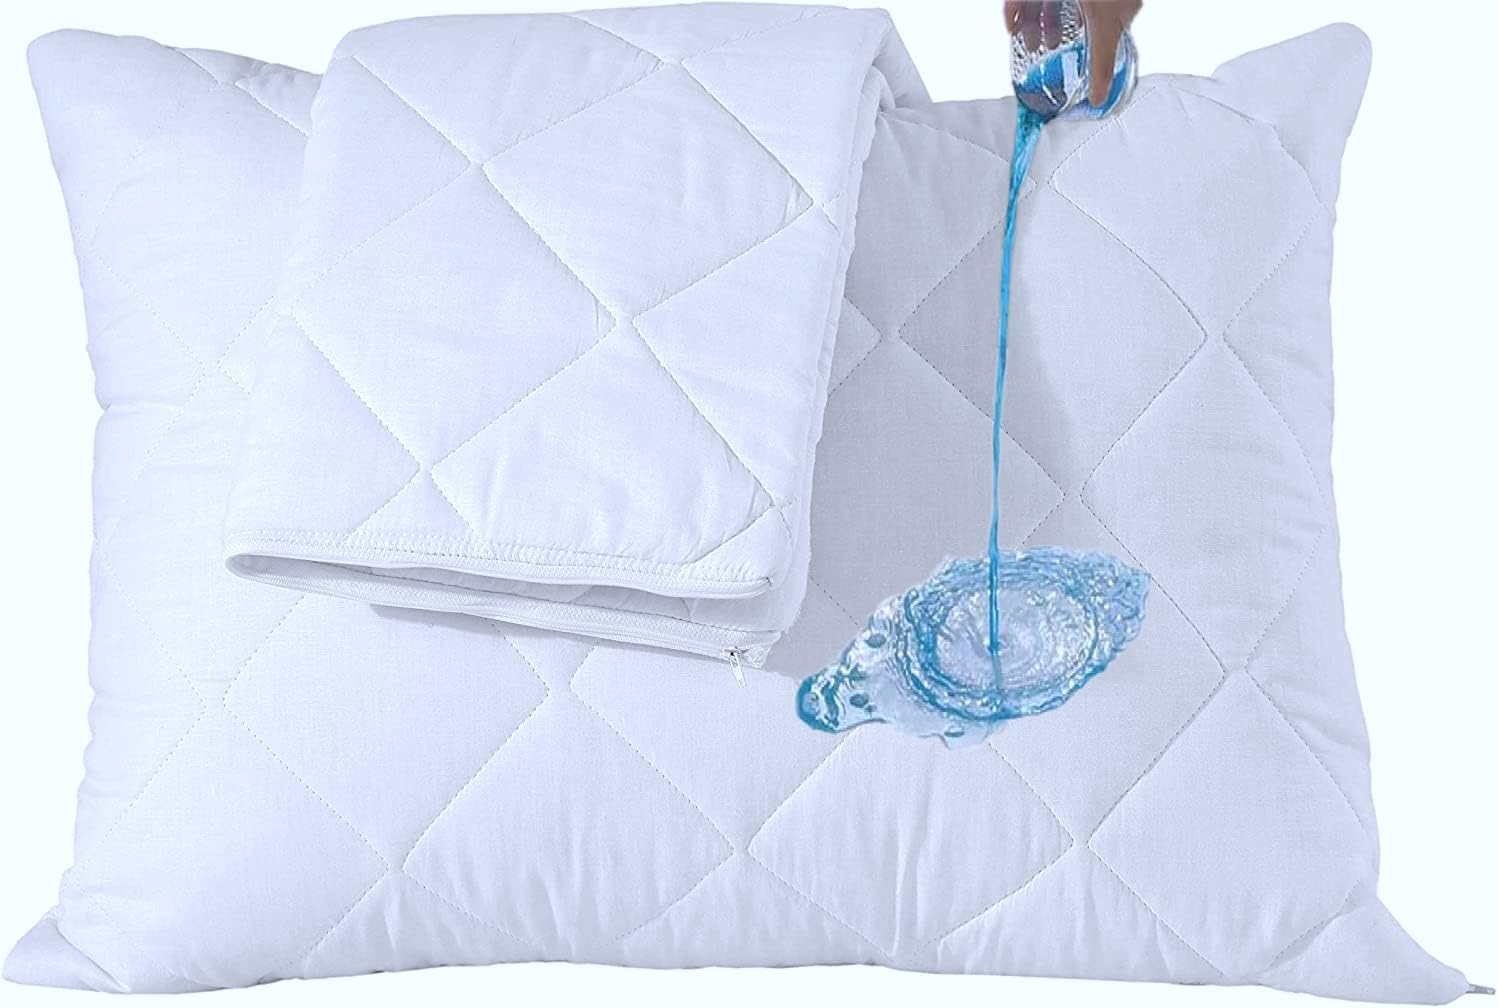 Set of 2 Waterproof Quilted Pillow Protectors Standard Size Ultra Soft Thick Pair 20x26Inches Cooling Brushed Plush White Zippered